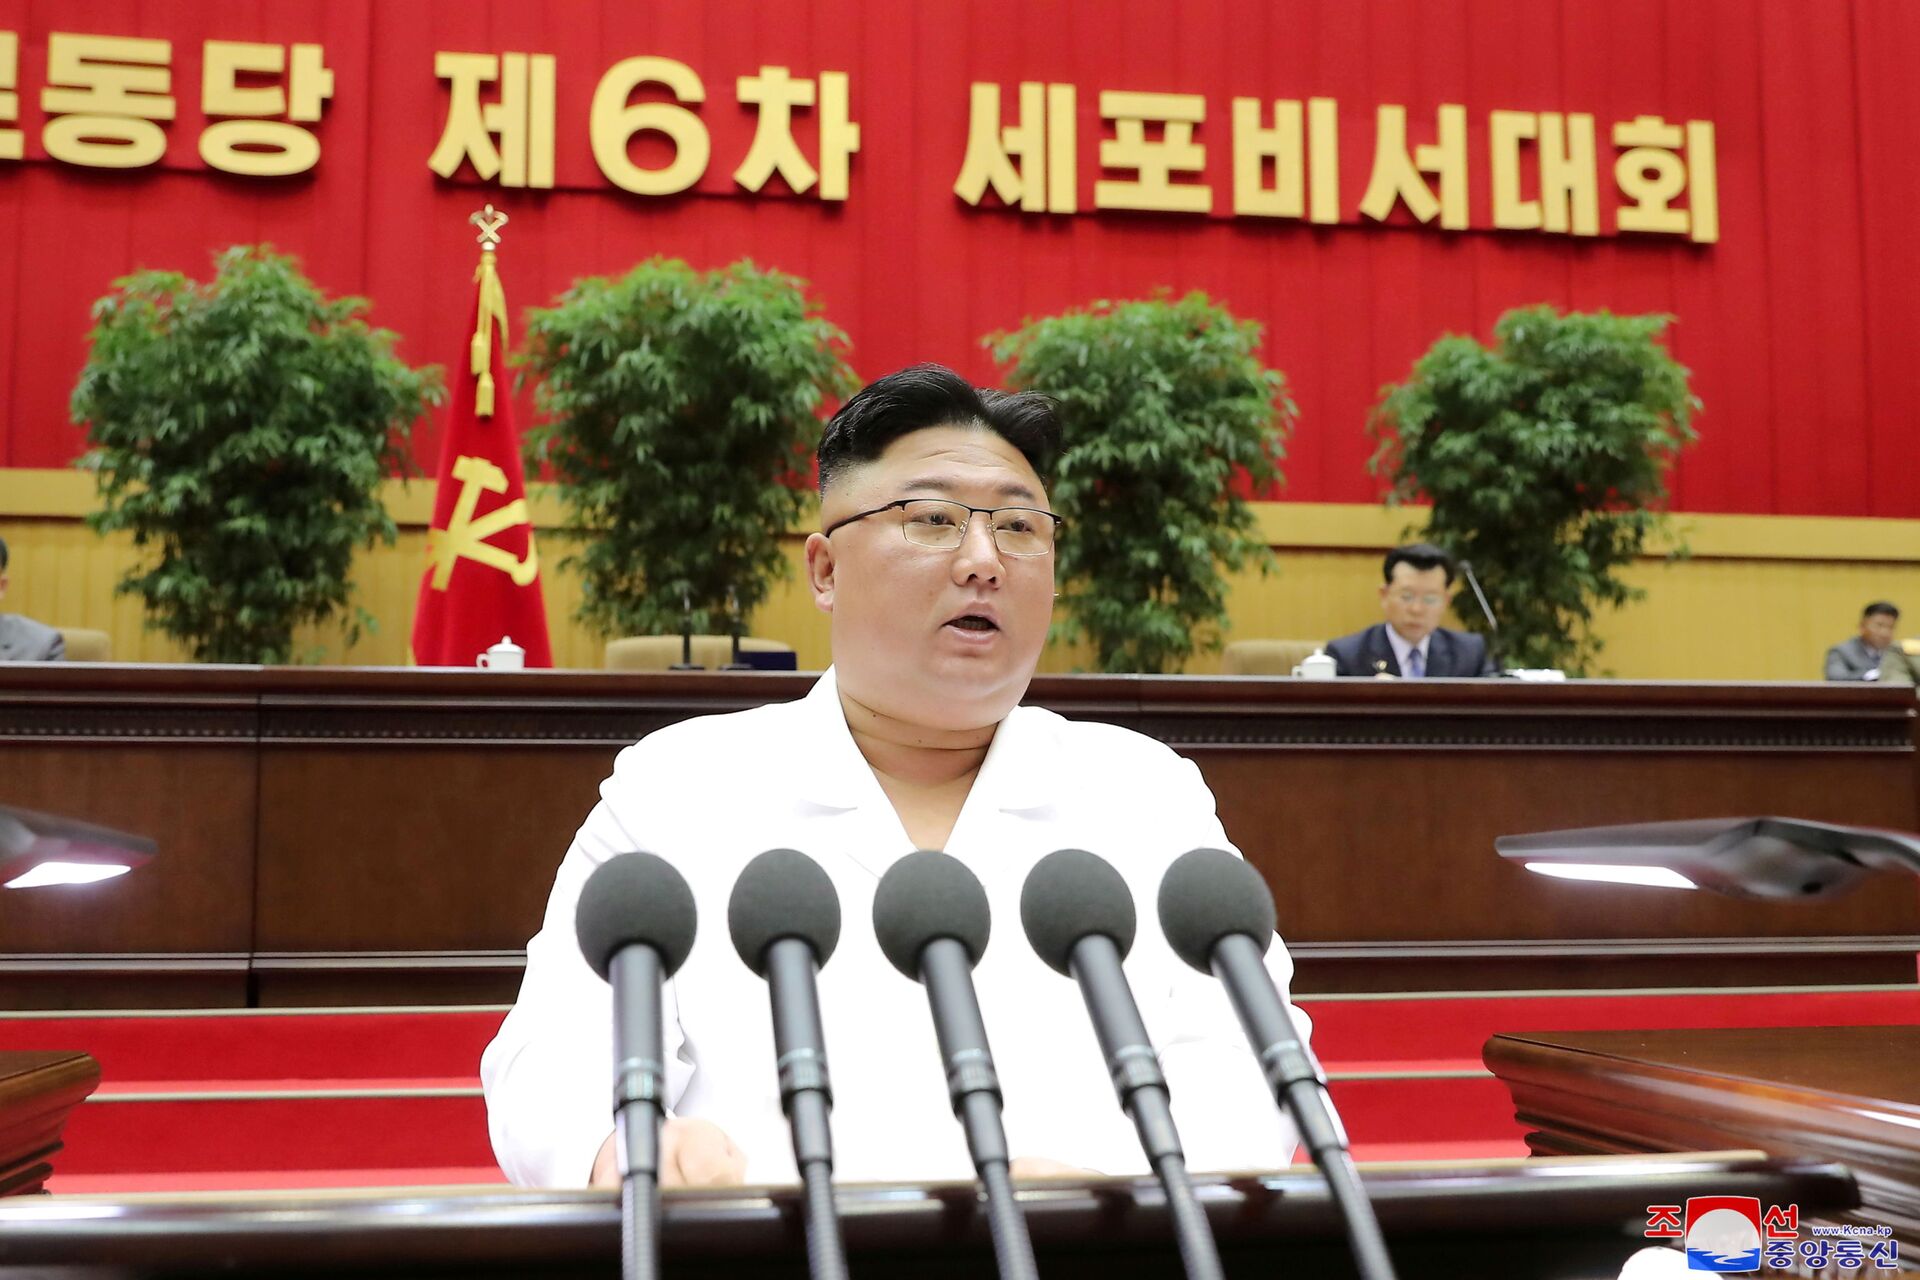 North Korean leader Kim Jong Un addresses a conference of cell secretaries of the ruling Workers' Party in Pyongyang, in this undated photo released on April 7, 2021 by North Korea's Korean Central News Agency (KCNA). - Sputnik International, 1920, 07.09.2021